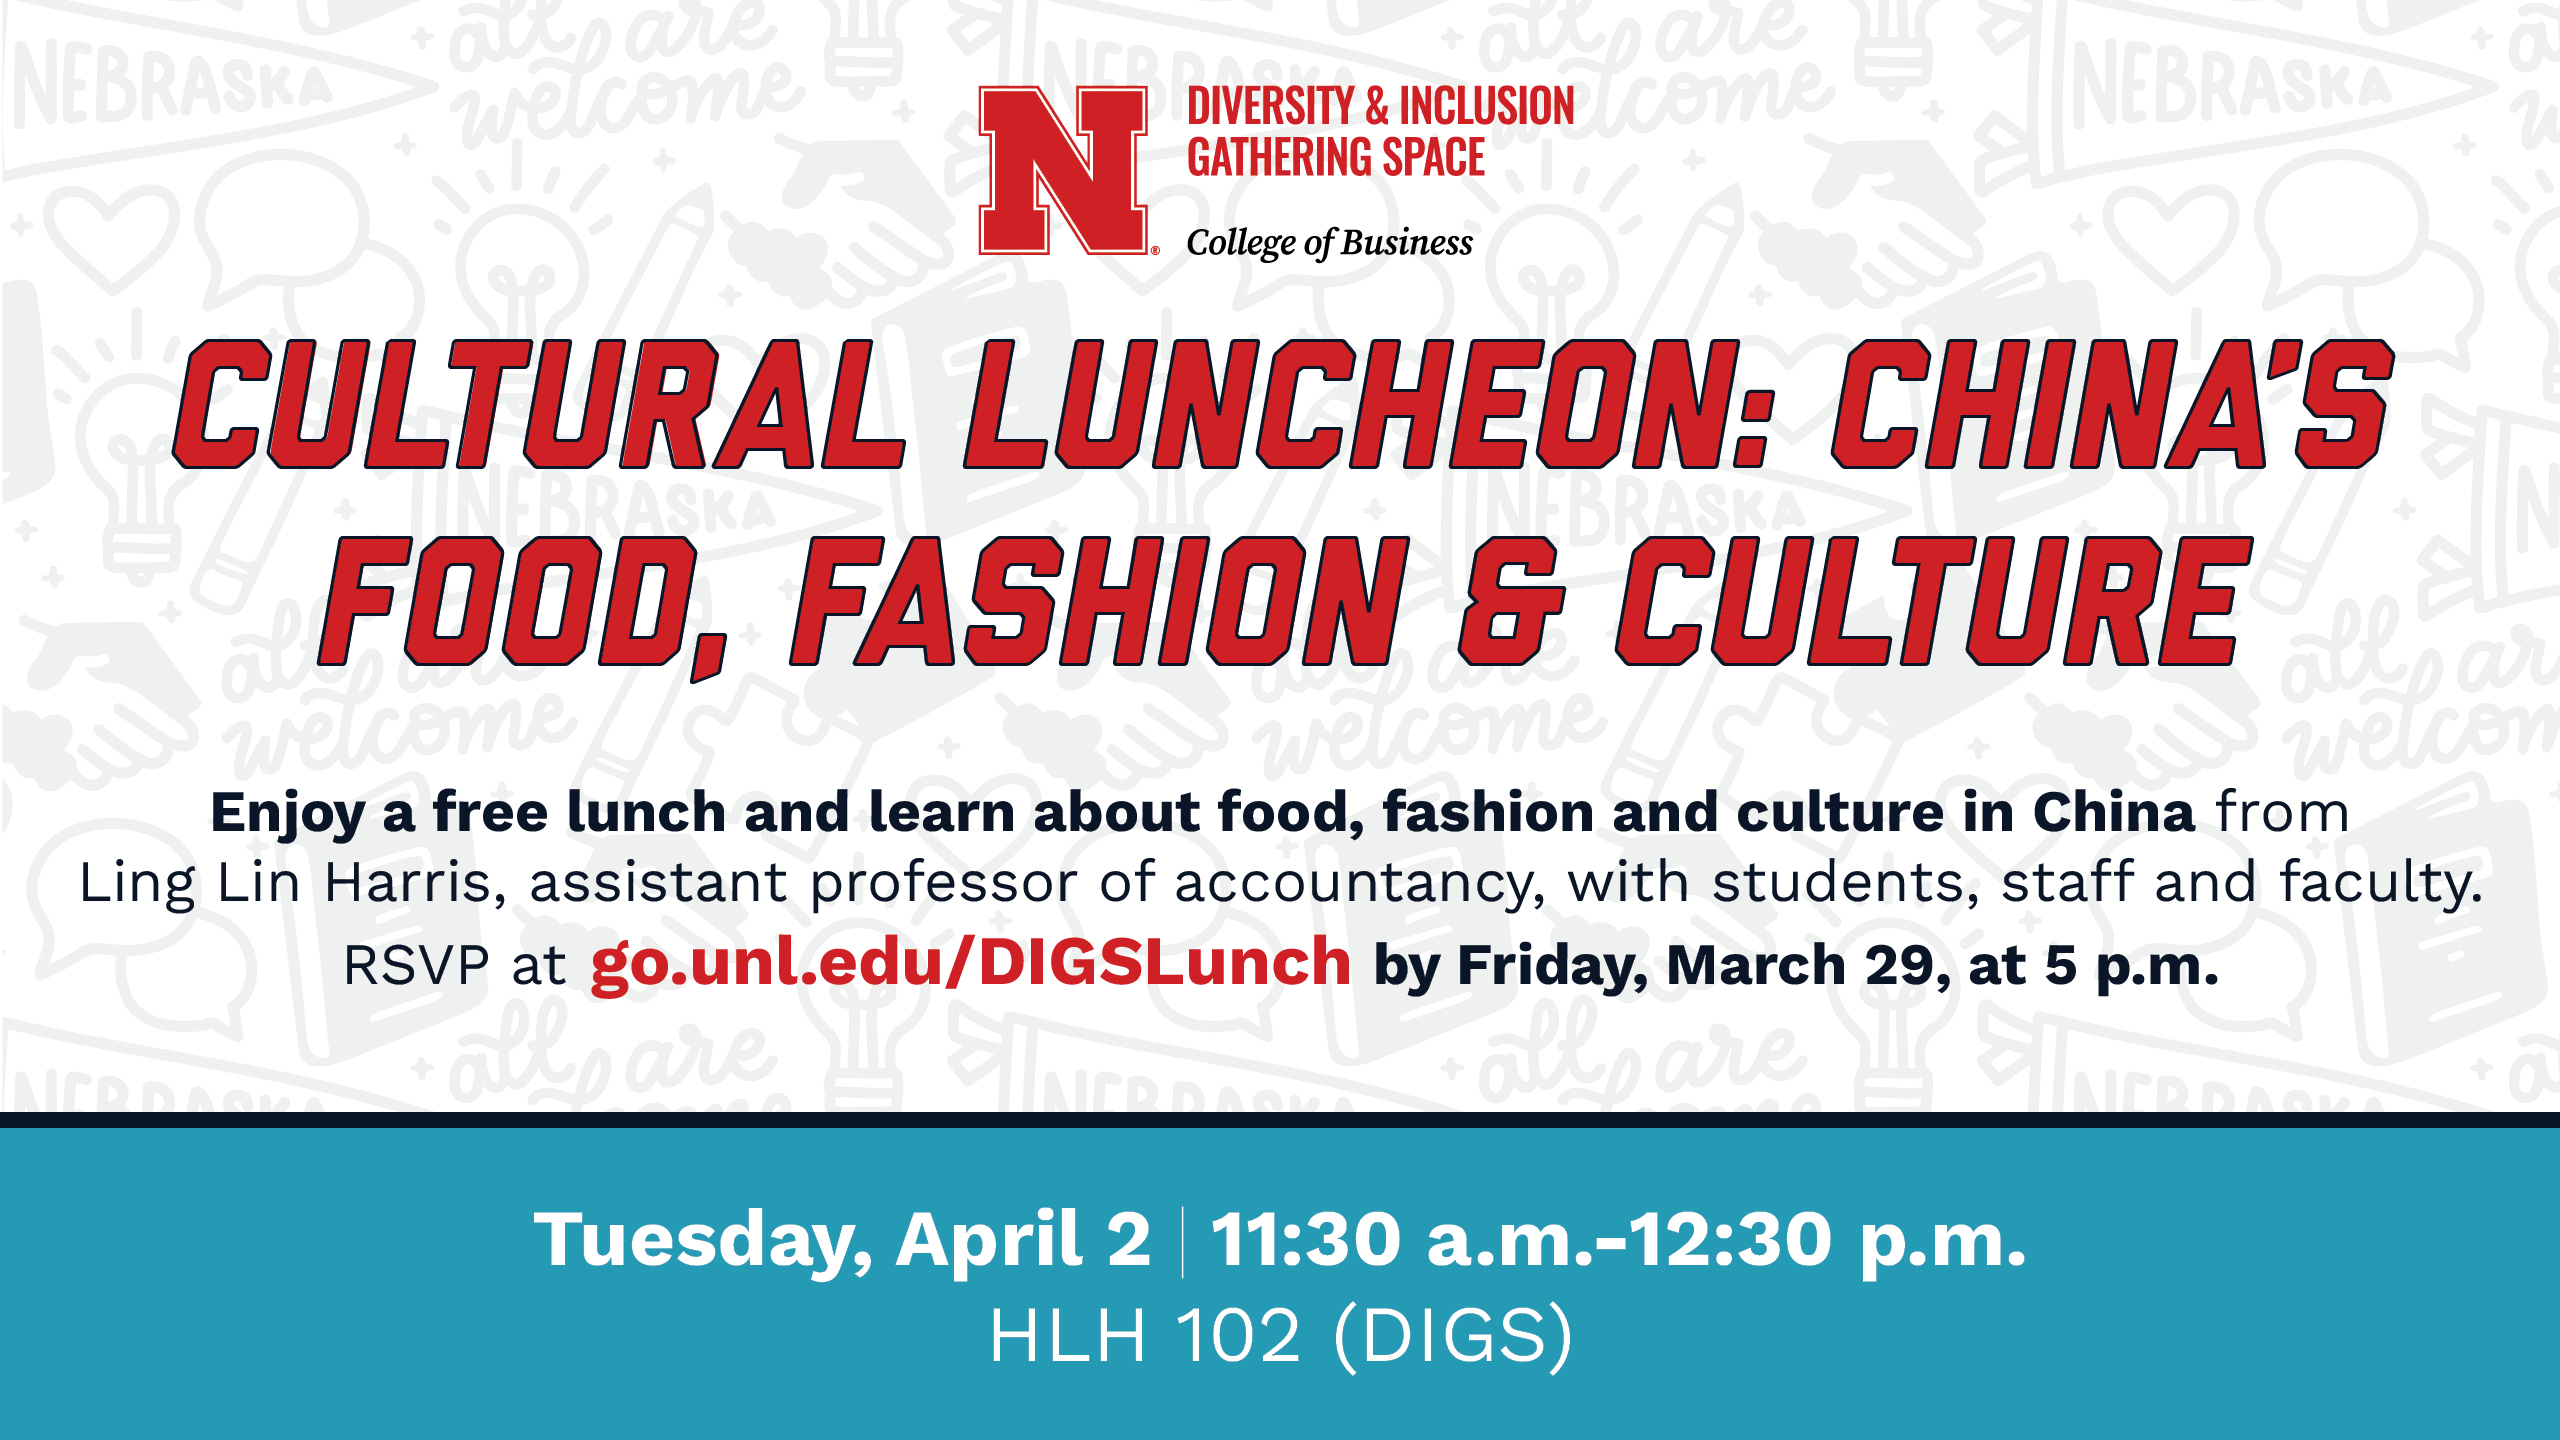 Cultural Luncheon: China's Food, Fashion and Culture | RSVP by Friday March 29